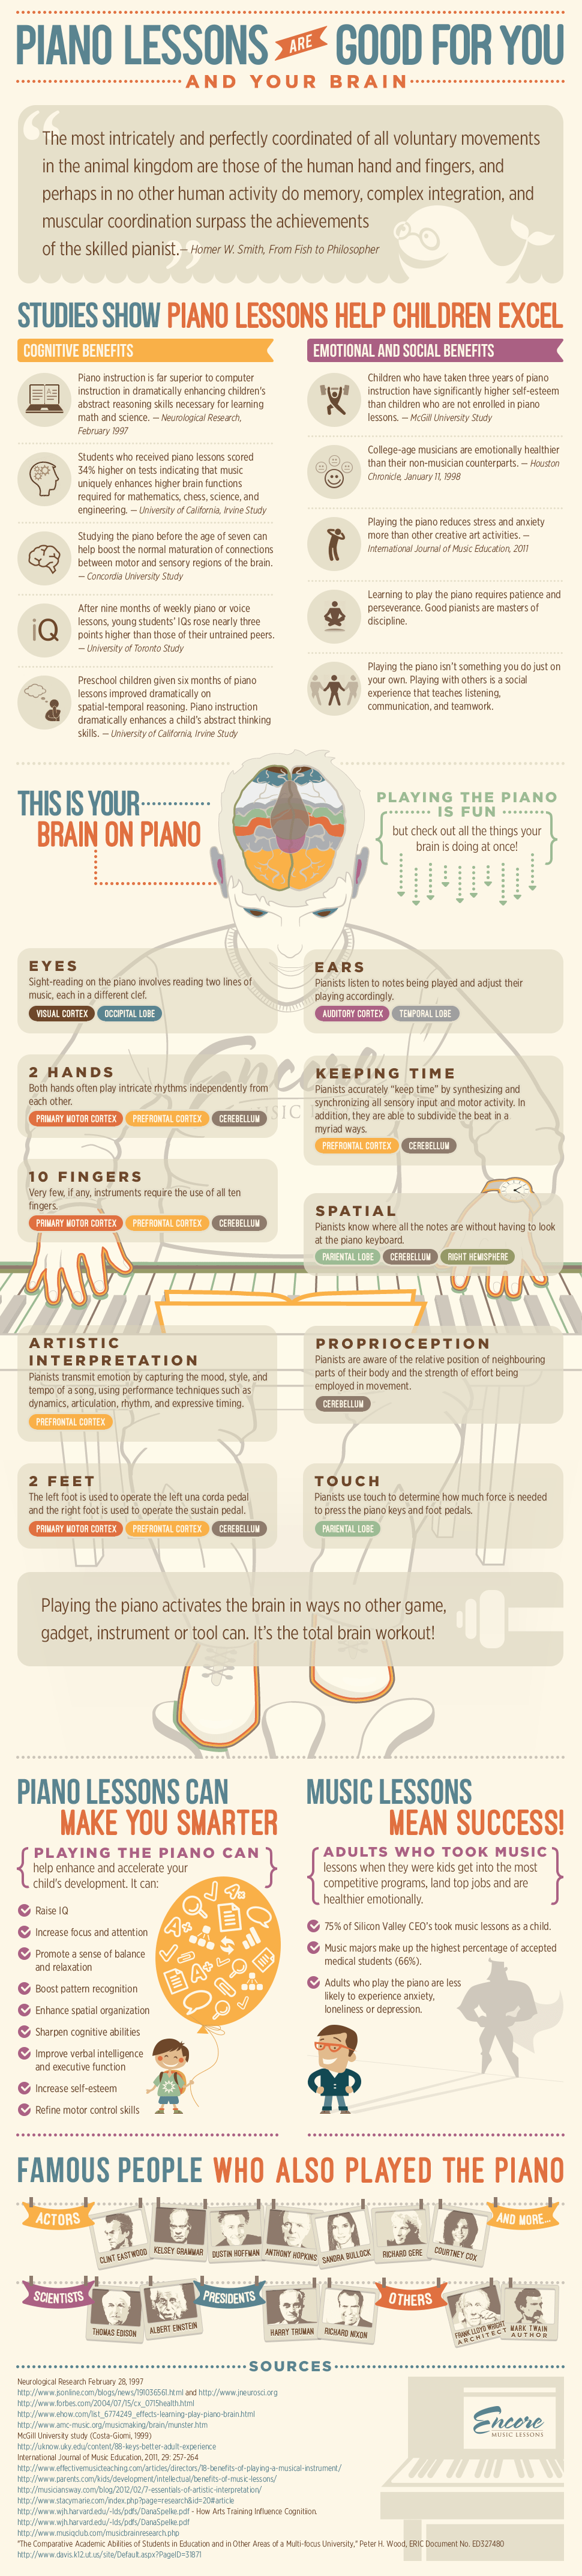 infographic-piano-lessons-are-good-for-you-and-your-brain